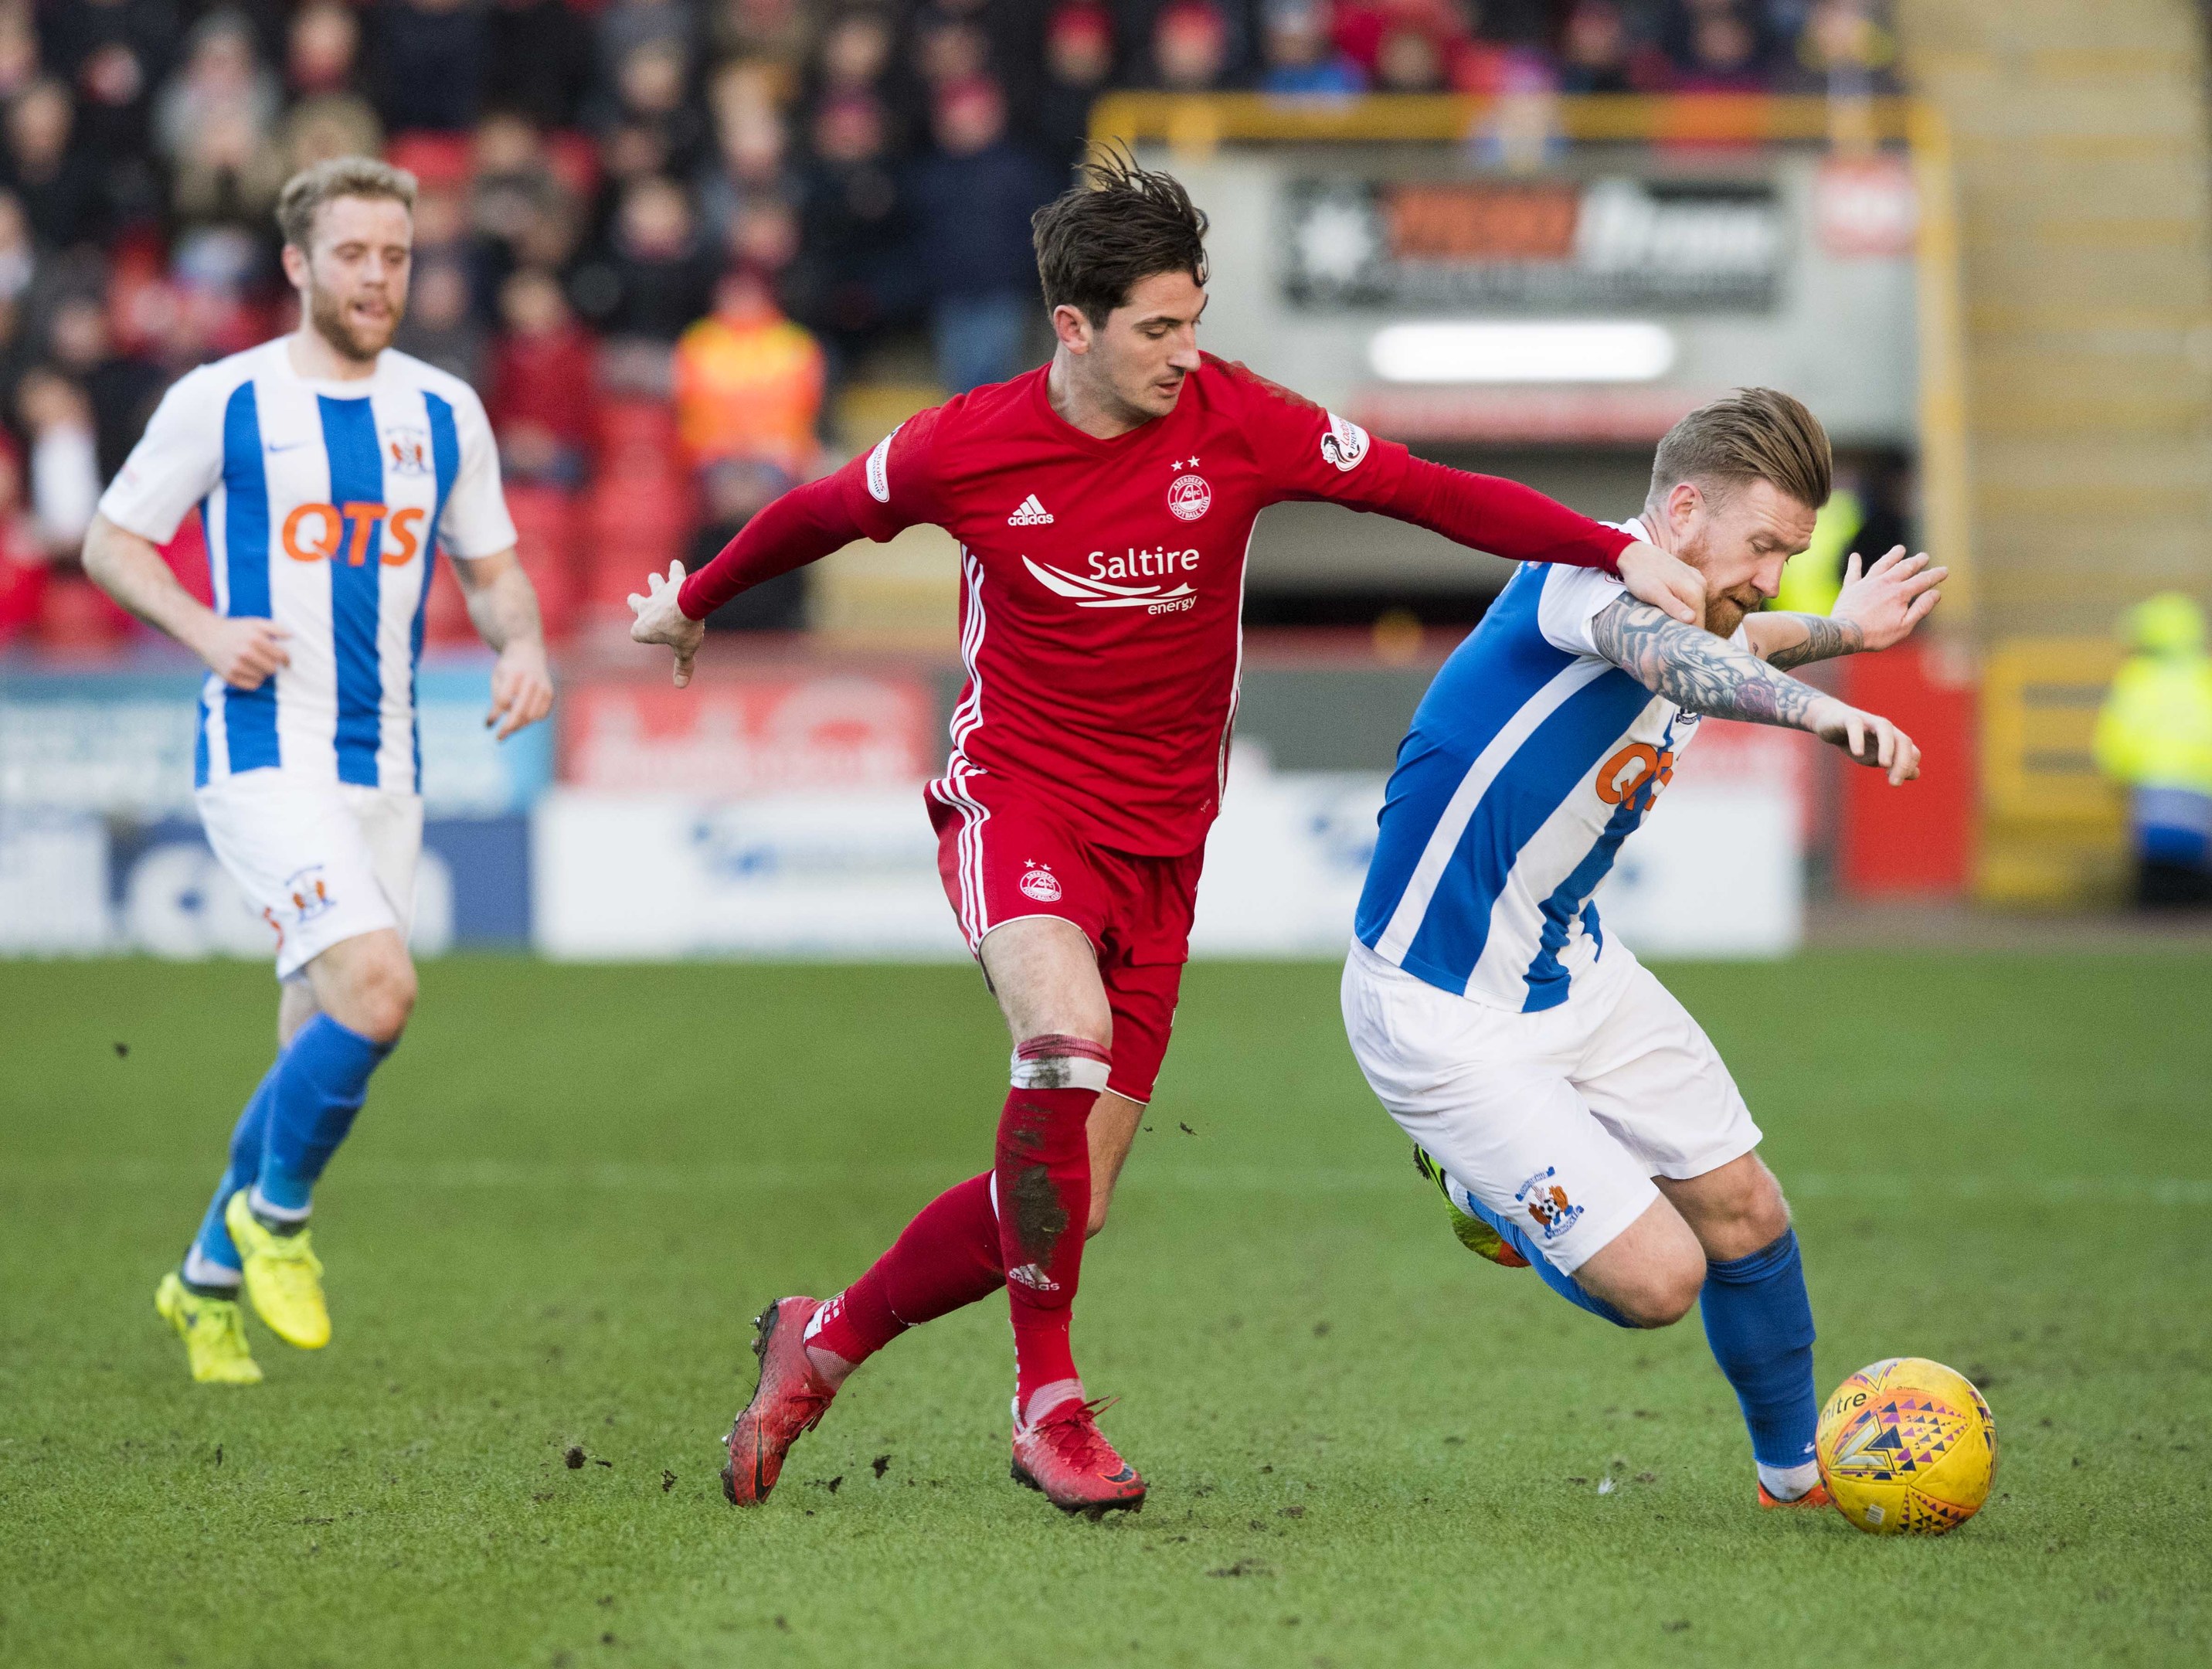 Kilmarnock's Rory Mackenzie and Aberdeen's Kenny McLean contest the ball at Pittodrie.